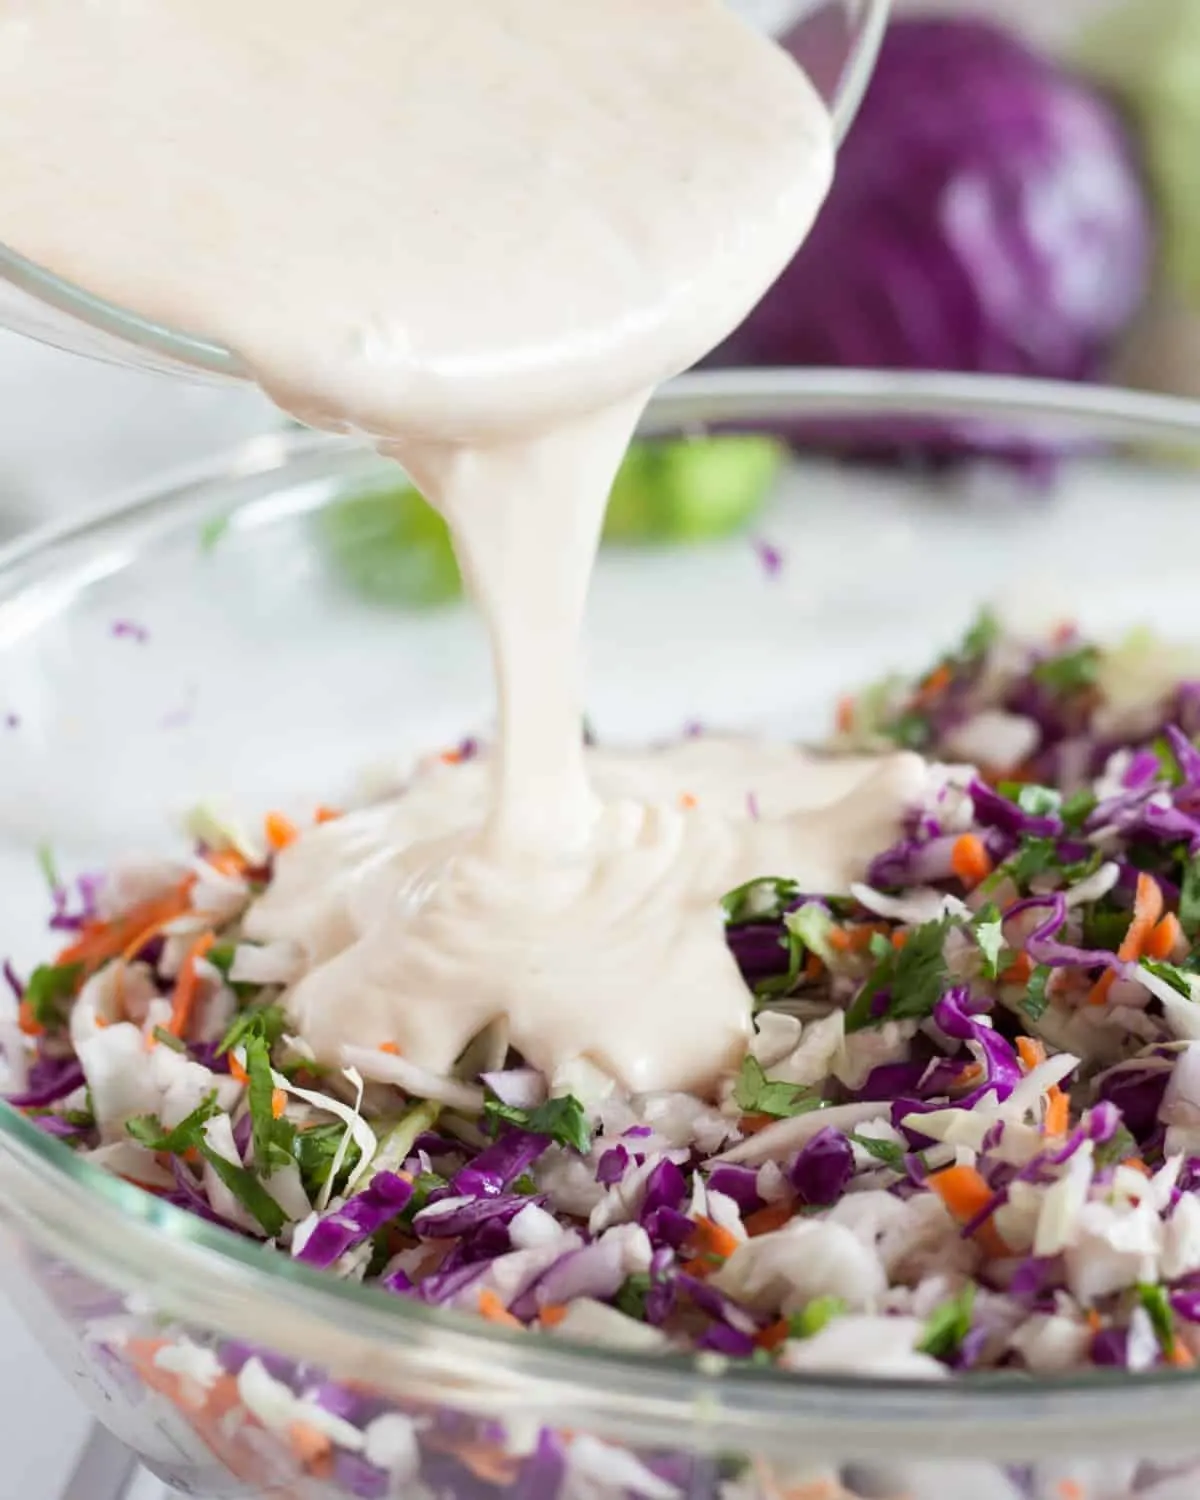 Creamy crunchy cilantro lime coleslaw makes a perfect side dish for tacos, a BBQ, or as a salad. This coleslaw recipe is a deliciously light and refreshing twist. The simple healthy The combination of cabbage, red cabbage, carros, cilantro, with your choice of mayo, sour cream, or greek yogurt make a creamy coleslaw that you will want to make over and over again. #coleslaw #sidedish #cabbage #recipe #healthy #creamy